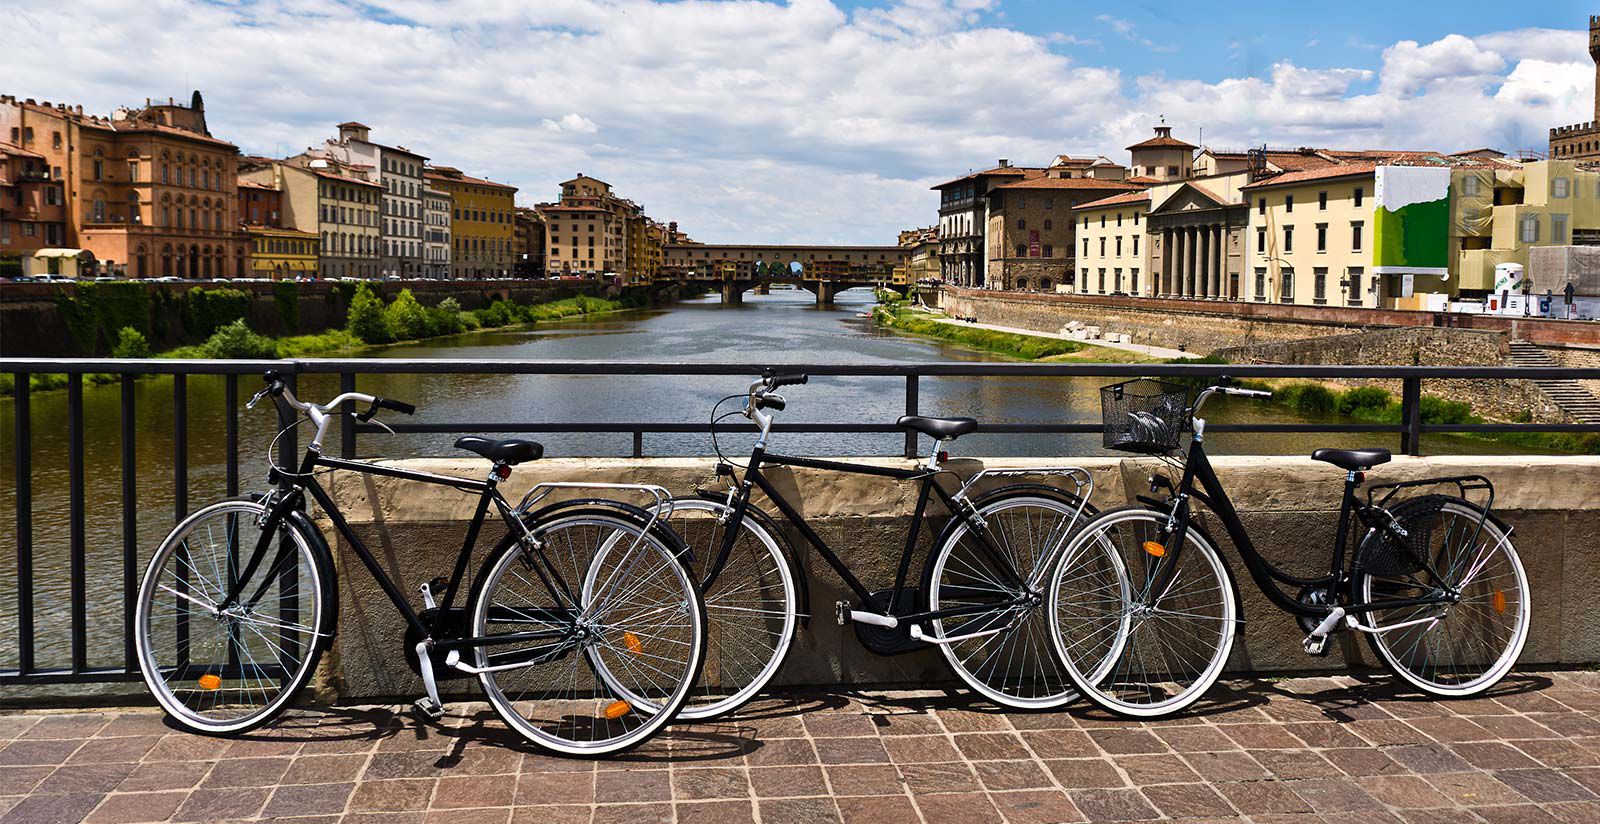 STAY AT PENDINI AND EASILY REACH PONTE VECCHIO 5